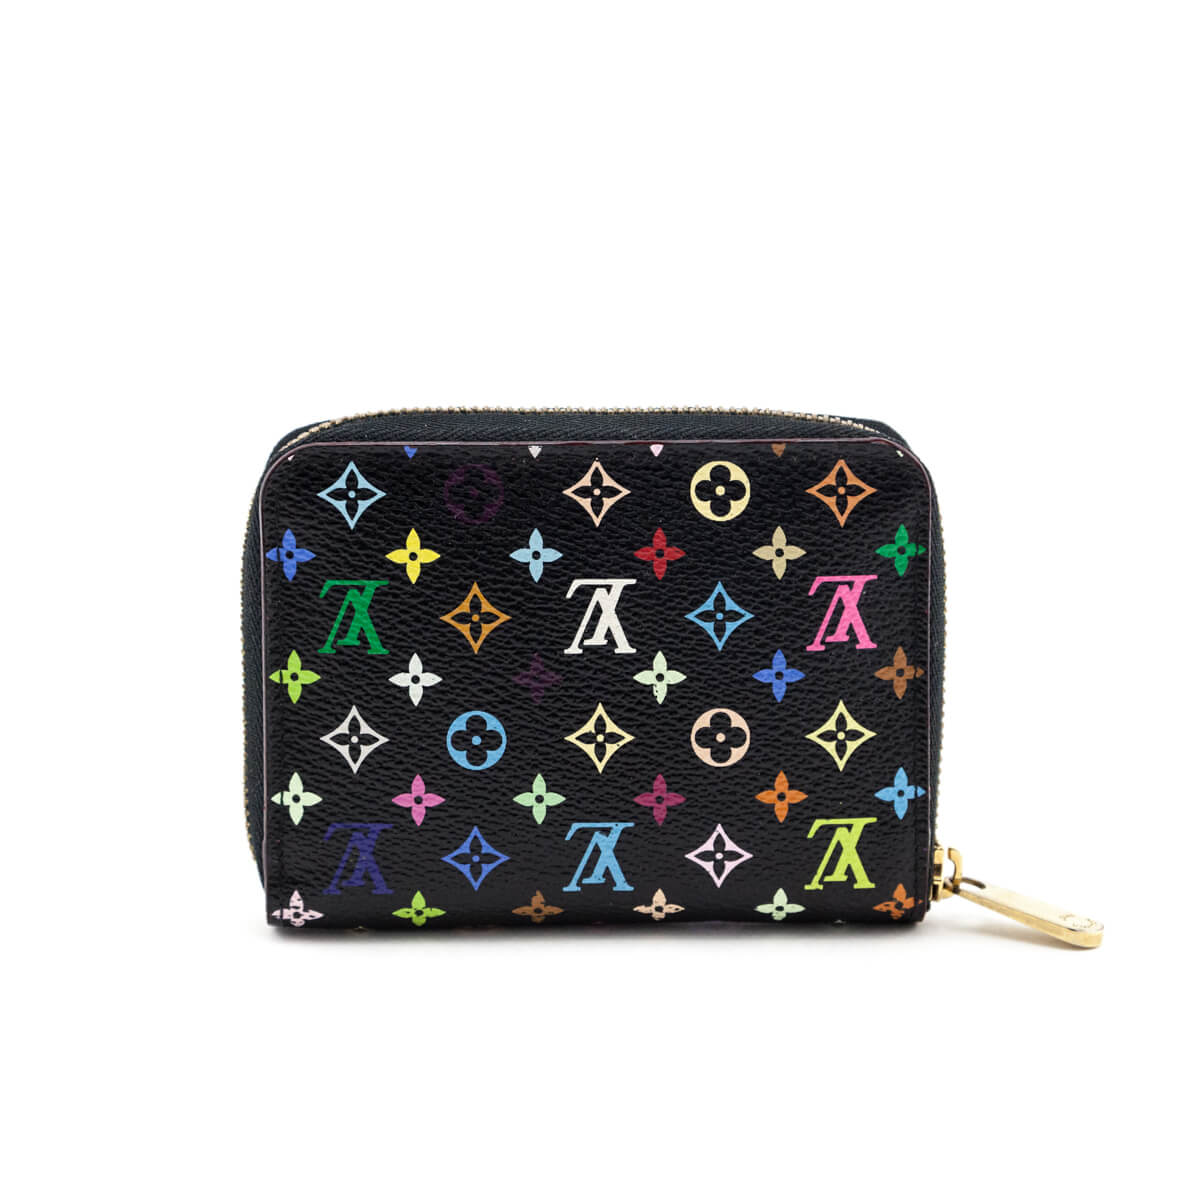 100% Authentic Luxury Goods - Preloved LV multicolor zippy small